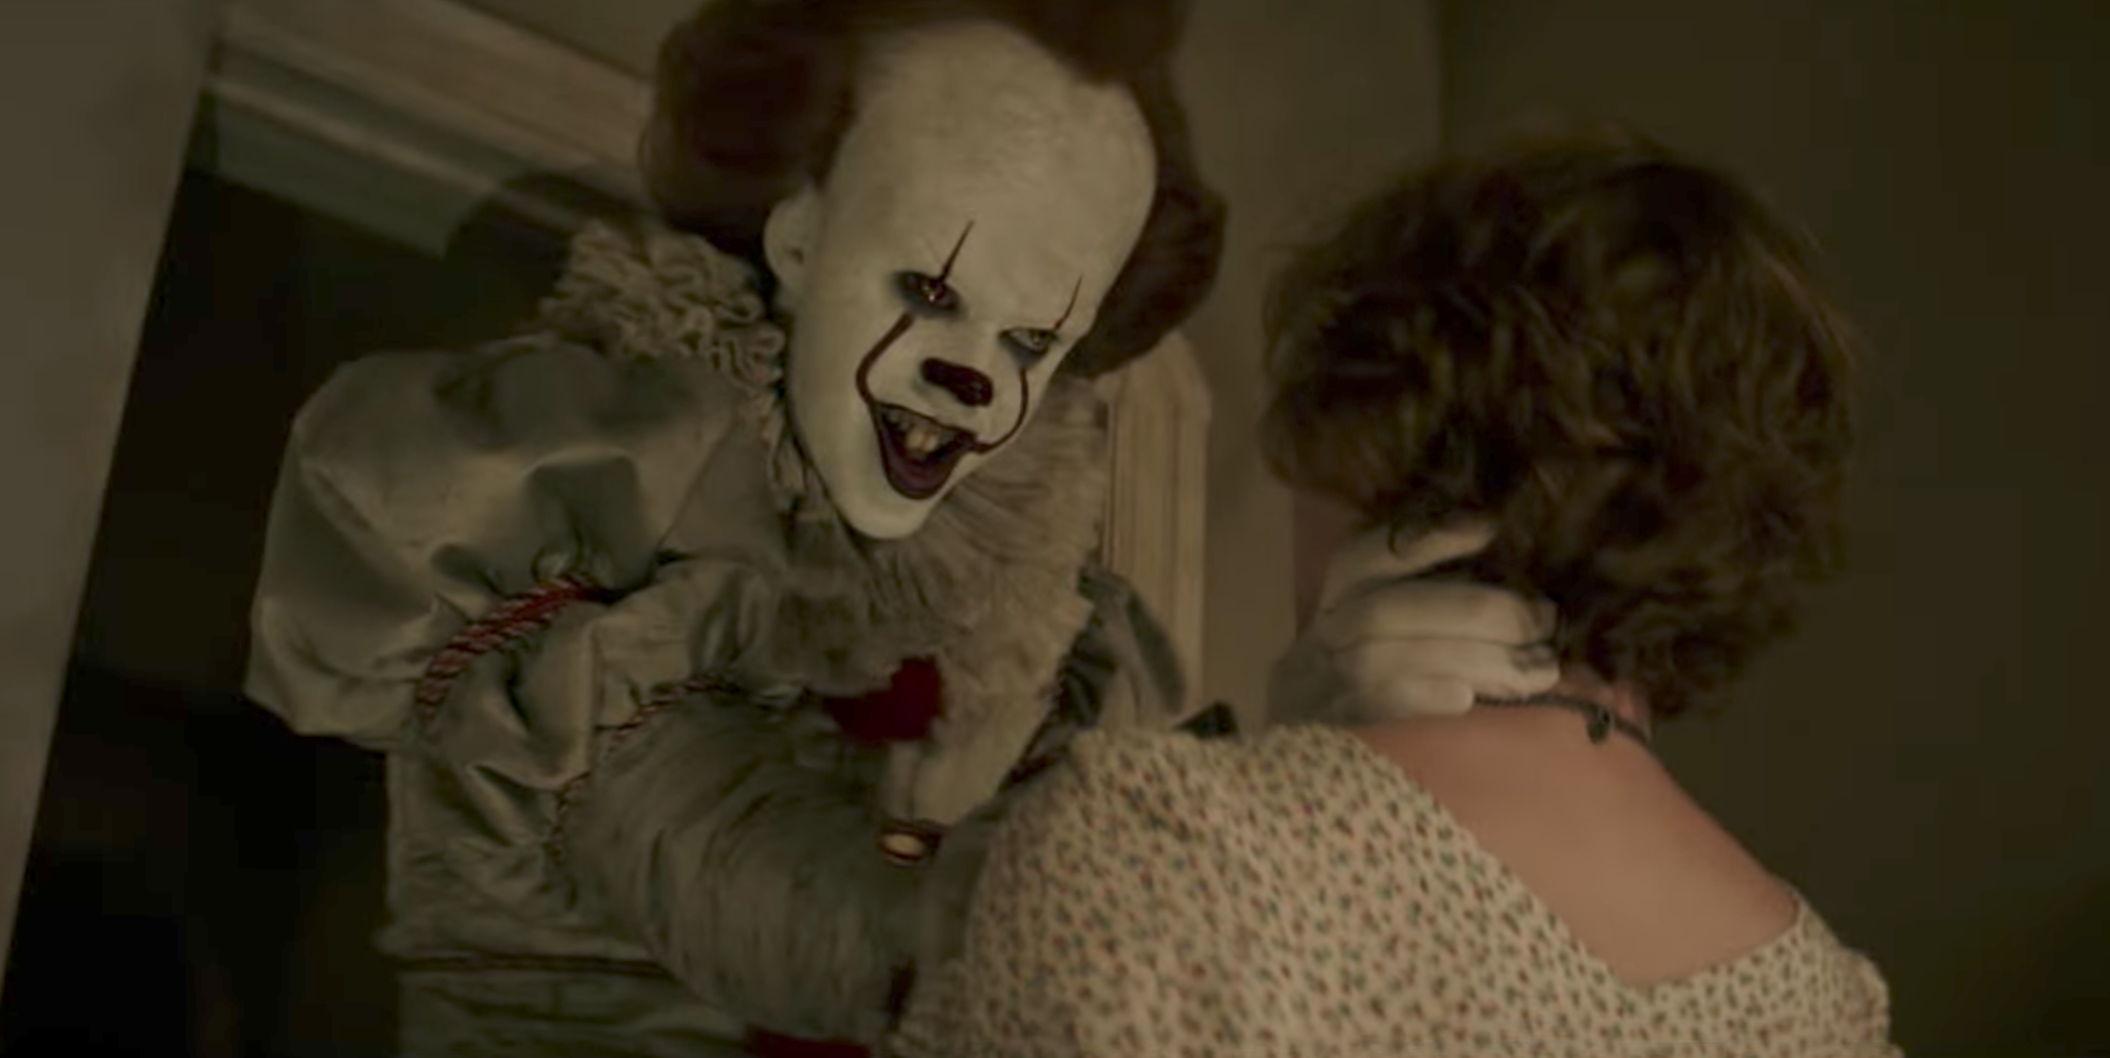 5 Life Lessons and Moral Value from Pennywise the Dancing Clown in ...